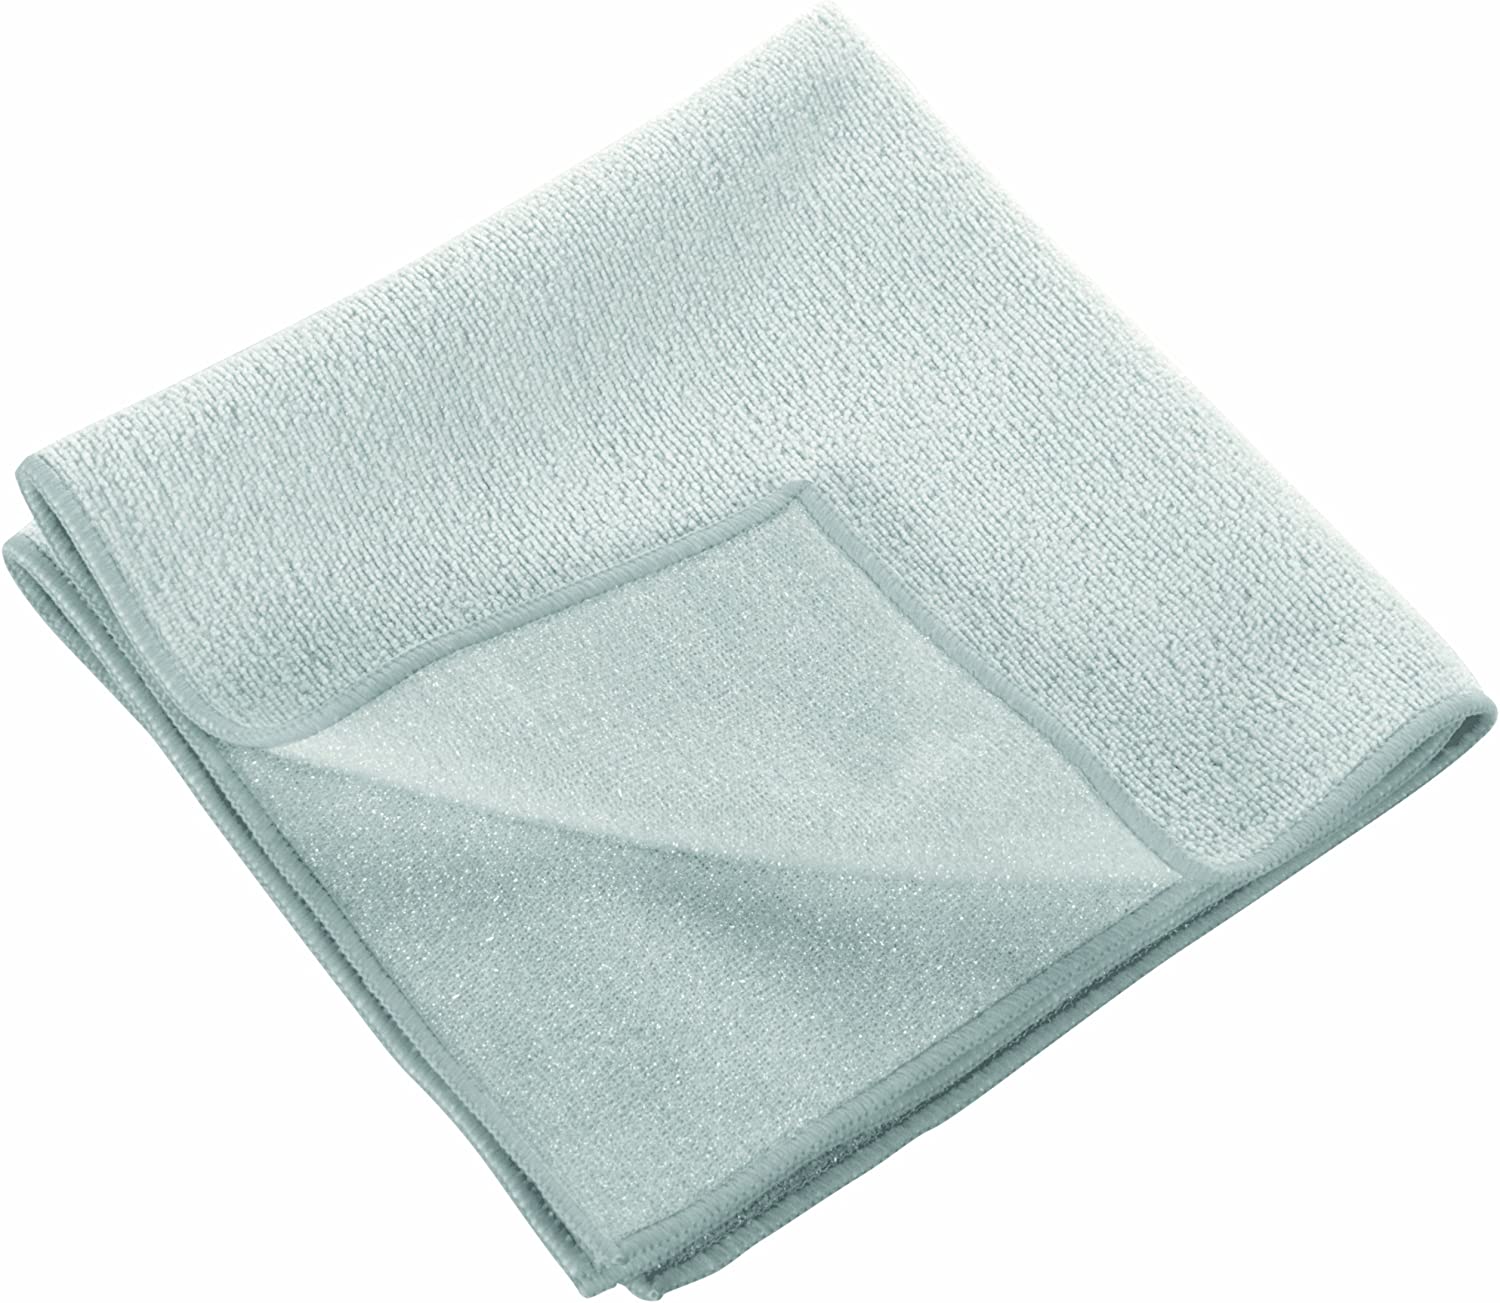 Cleaning cloth with scourer kit